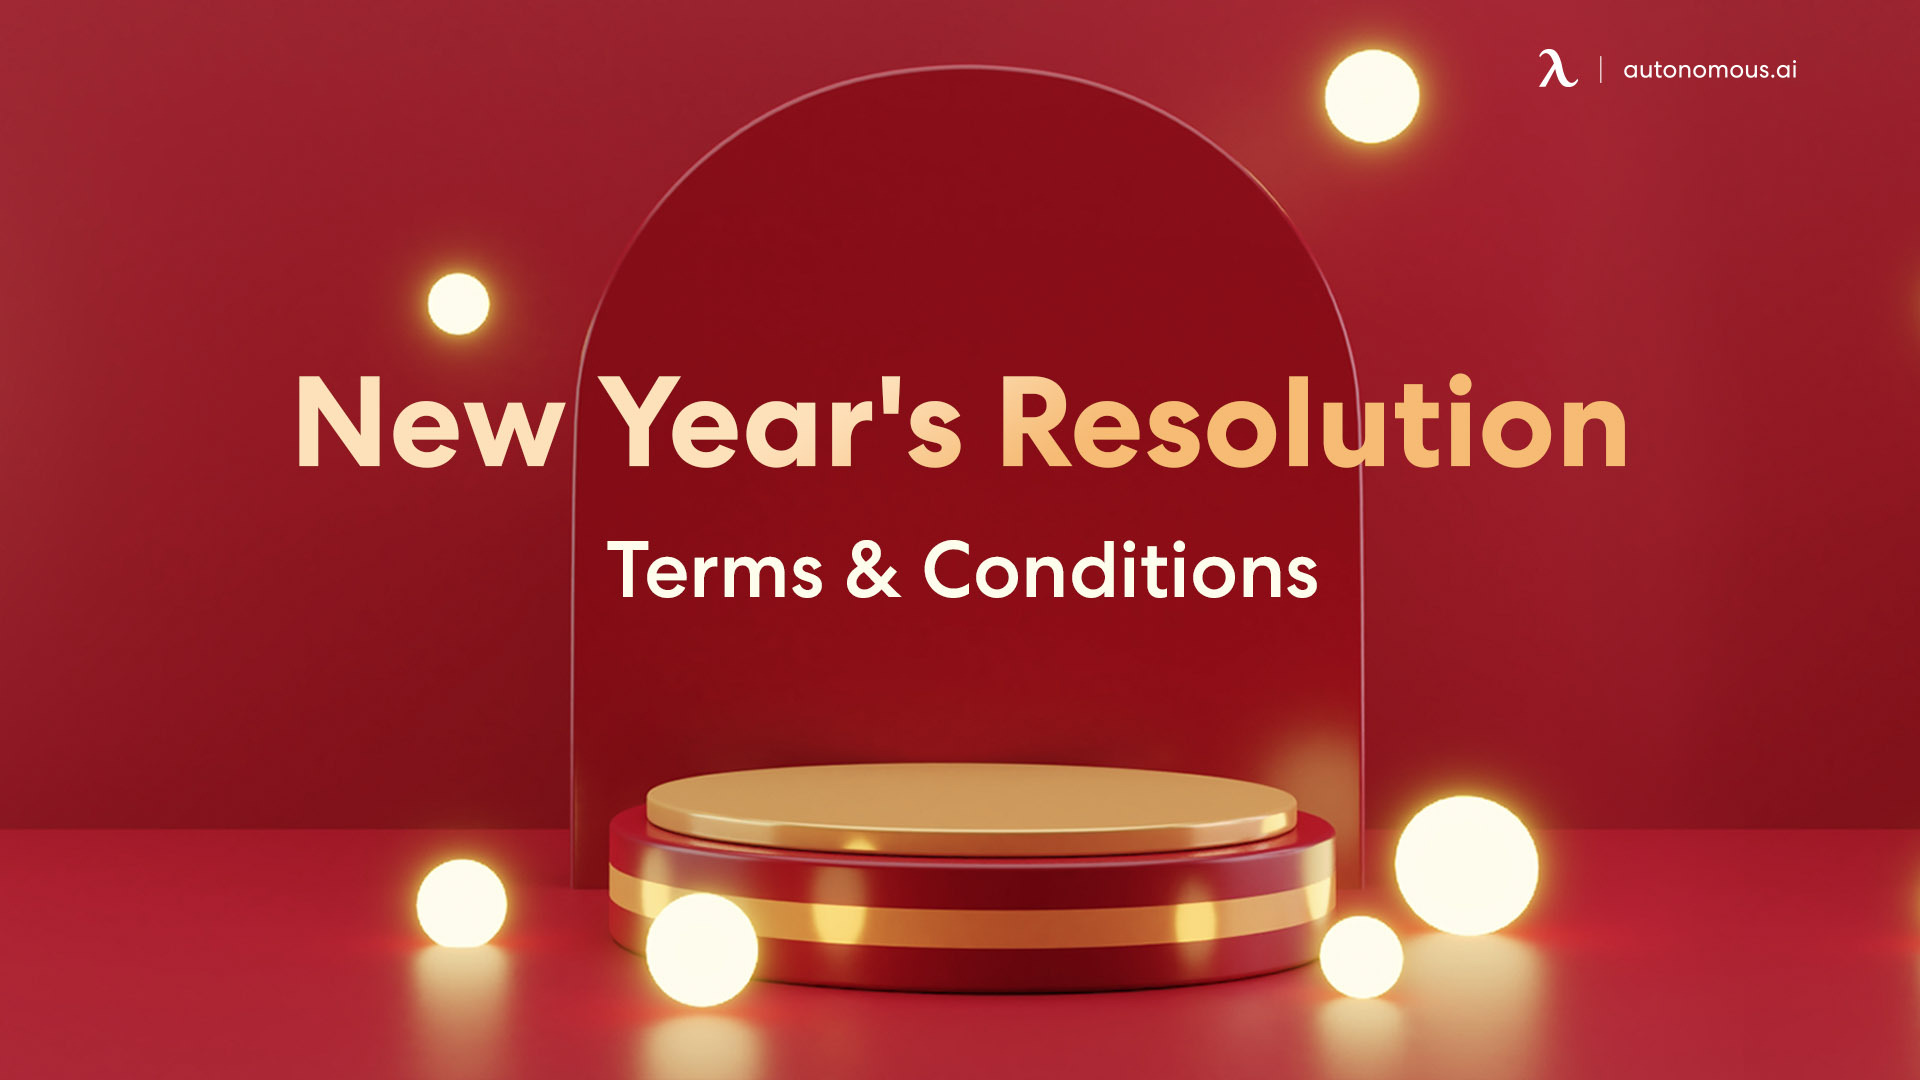 NEW YEAR'S RESOLUTION PROMOTION - Terms and Conditions